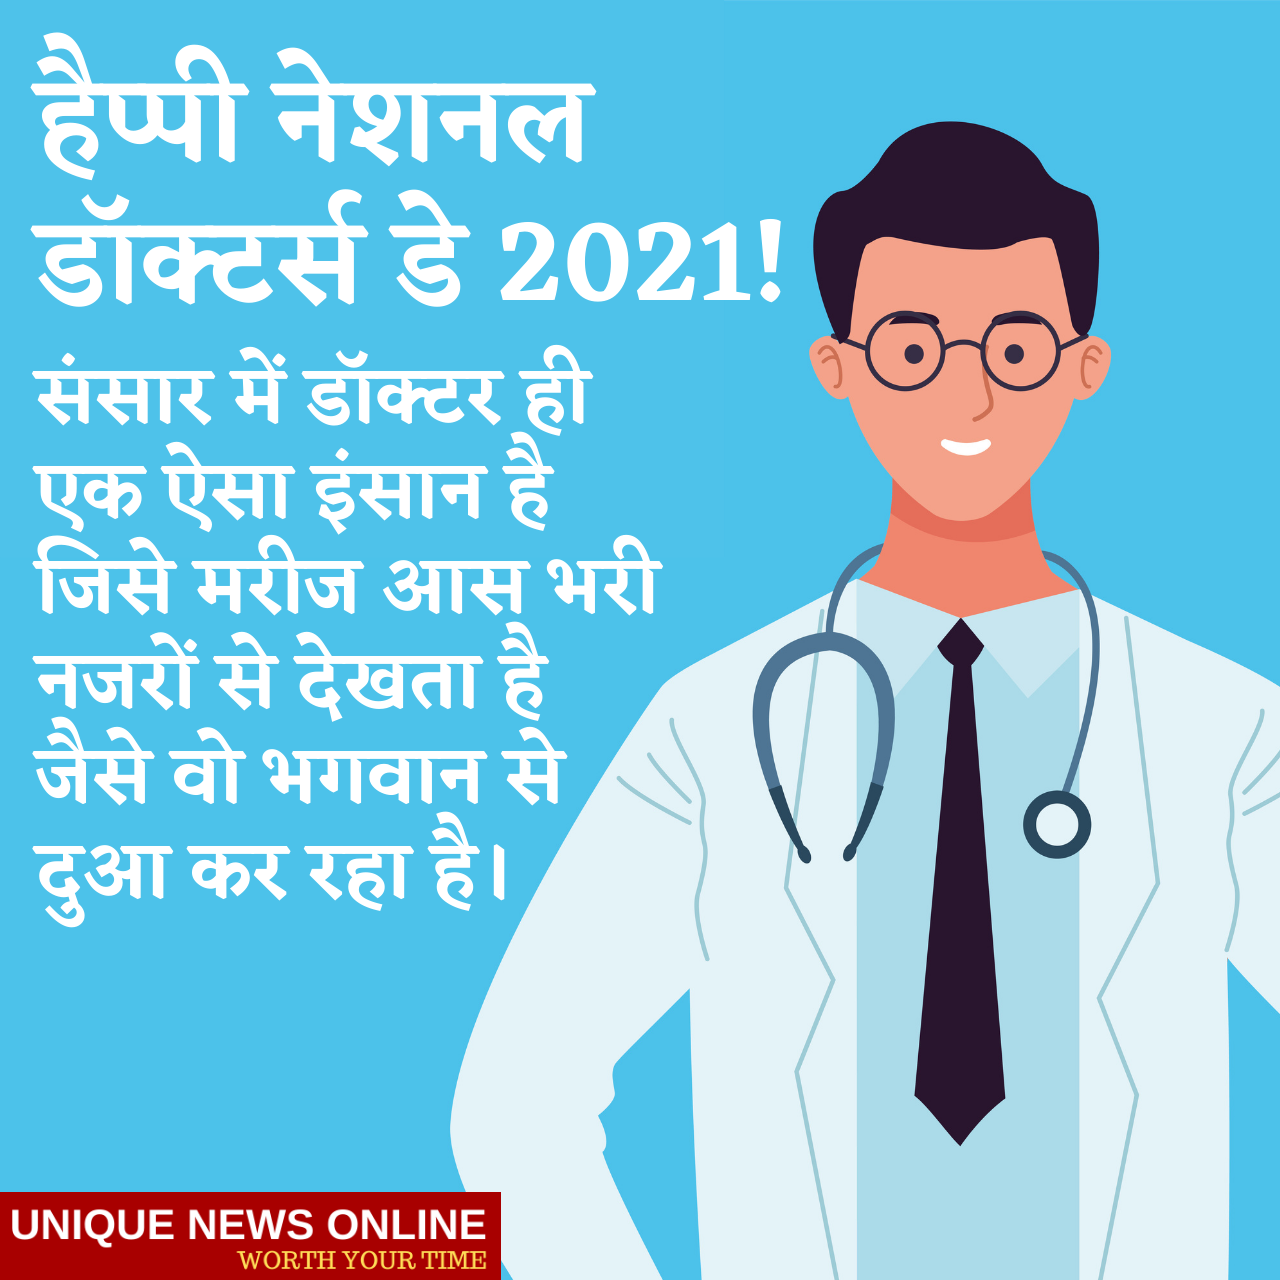 National Doctor's Day 2021: Hindi Wishes, Images (photos), Quotes, Greetings, Poster, and Messages to honour doctors